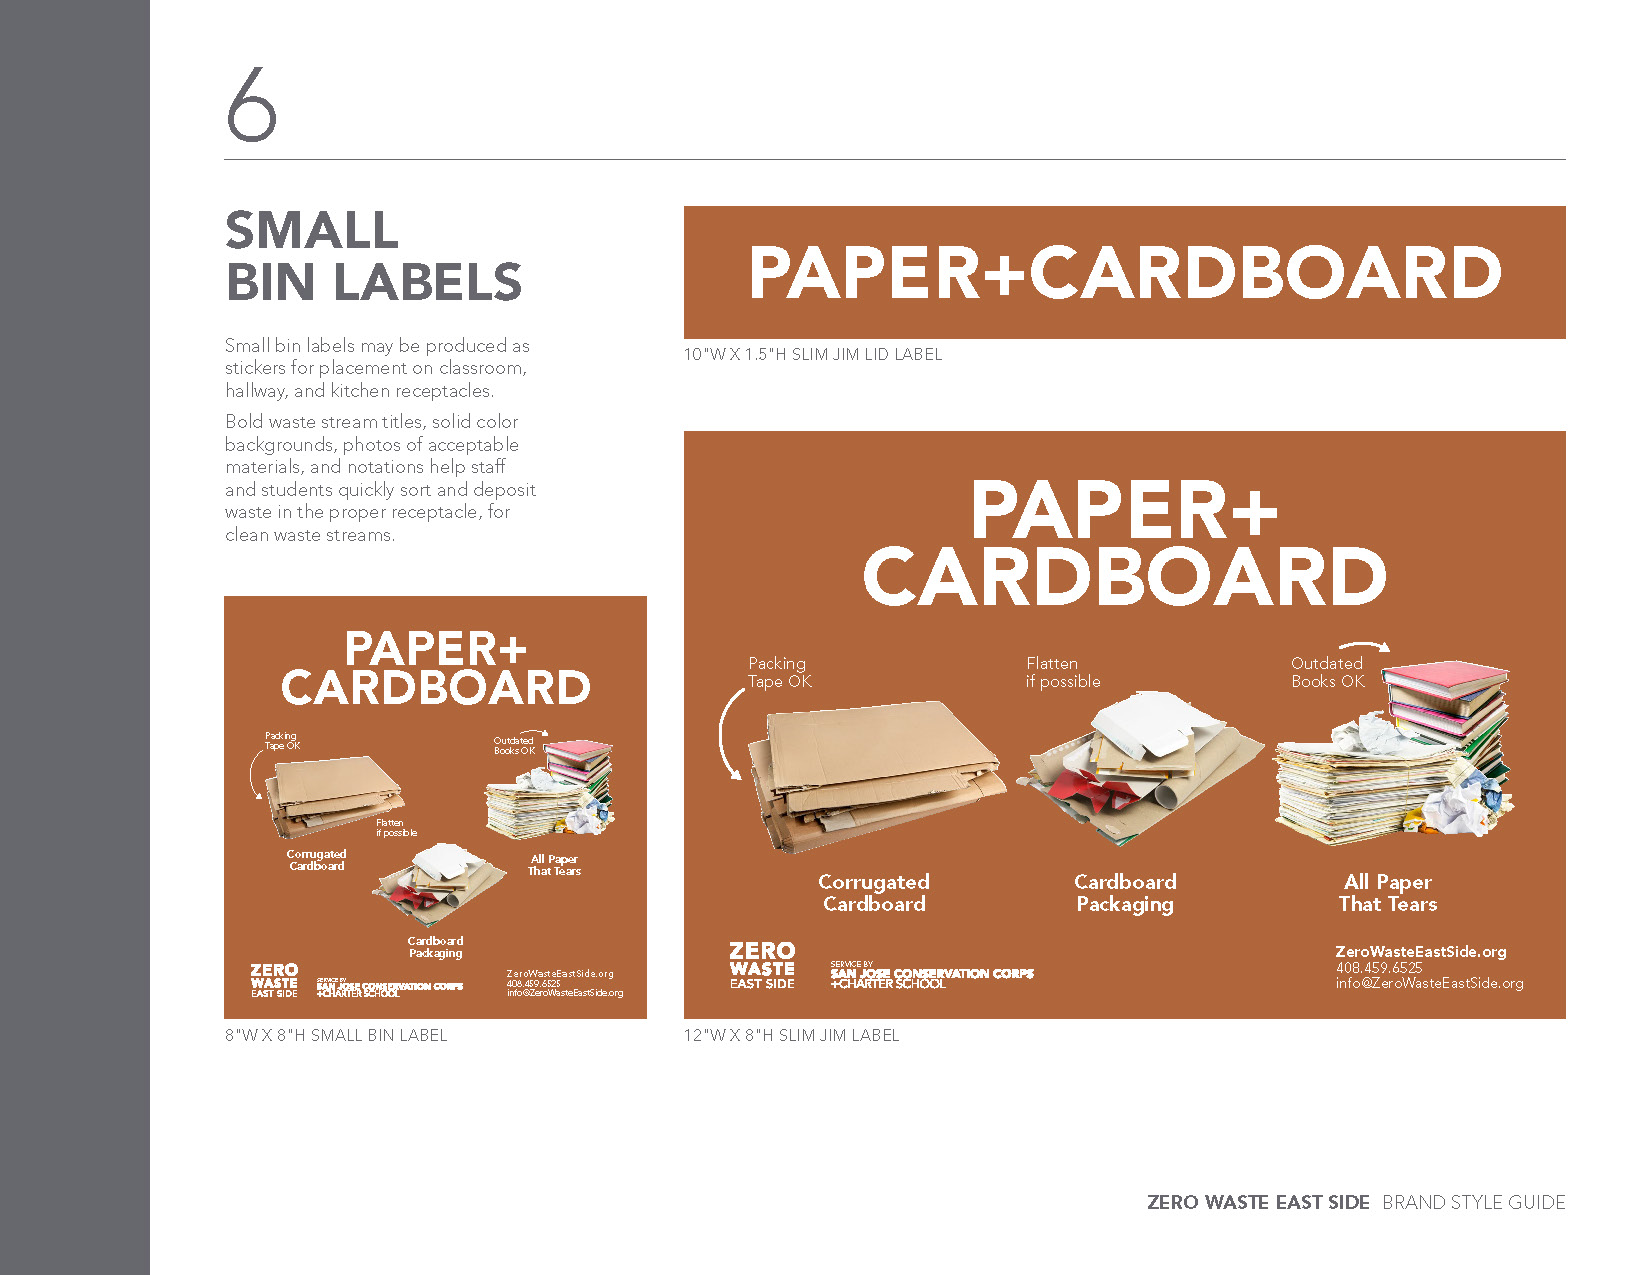 Page from the Zero Waste East Side brand style guide